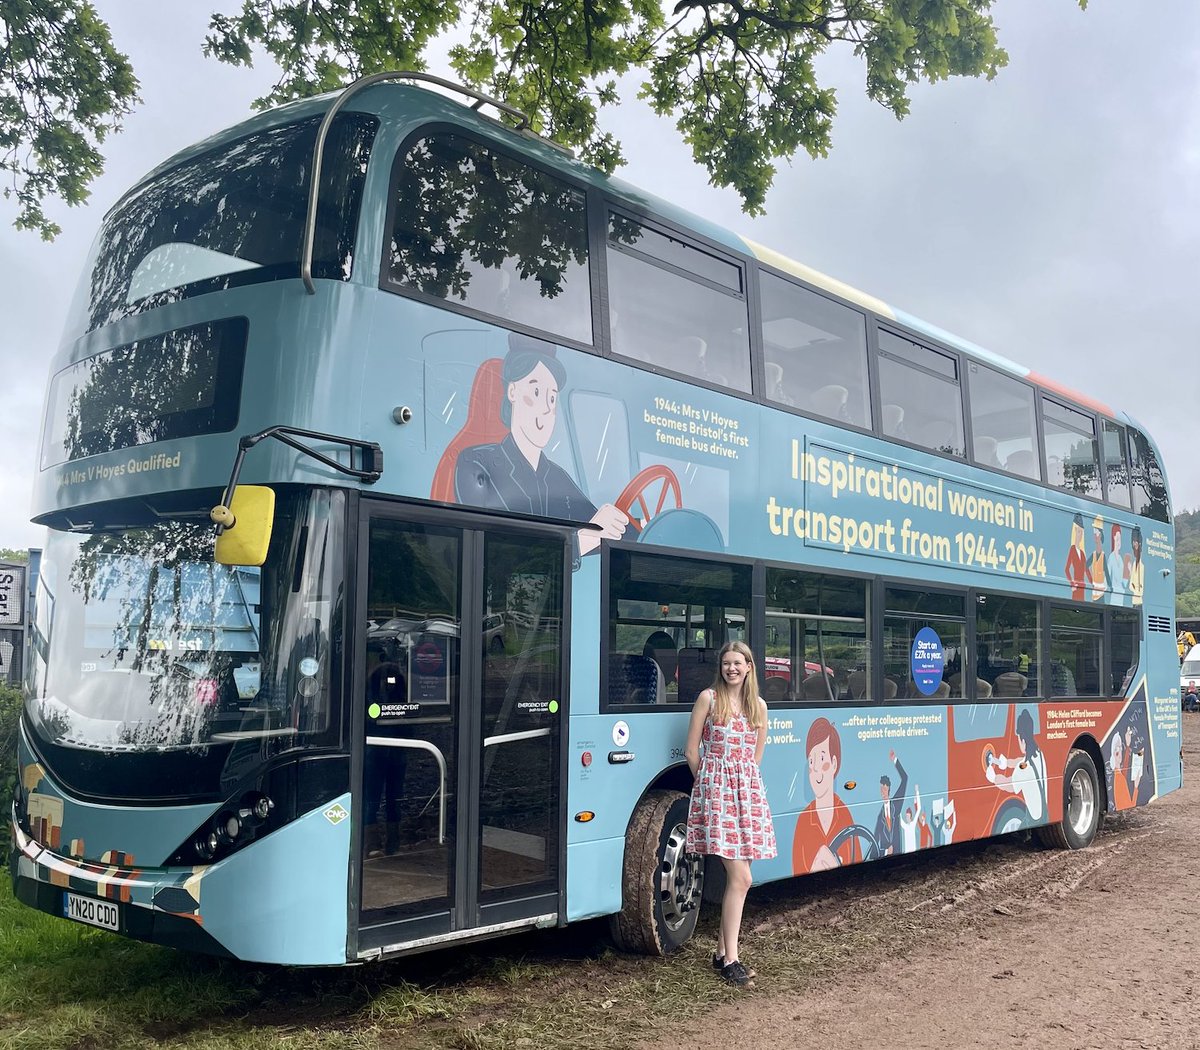 🚌 A new bus wrap designed by student Rosalyn Burroughs has been unveiled to mark 80 years since the first female bus drivers were employed in Bristol.

More ➡️ brnw.ch/21wJCda